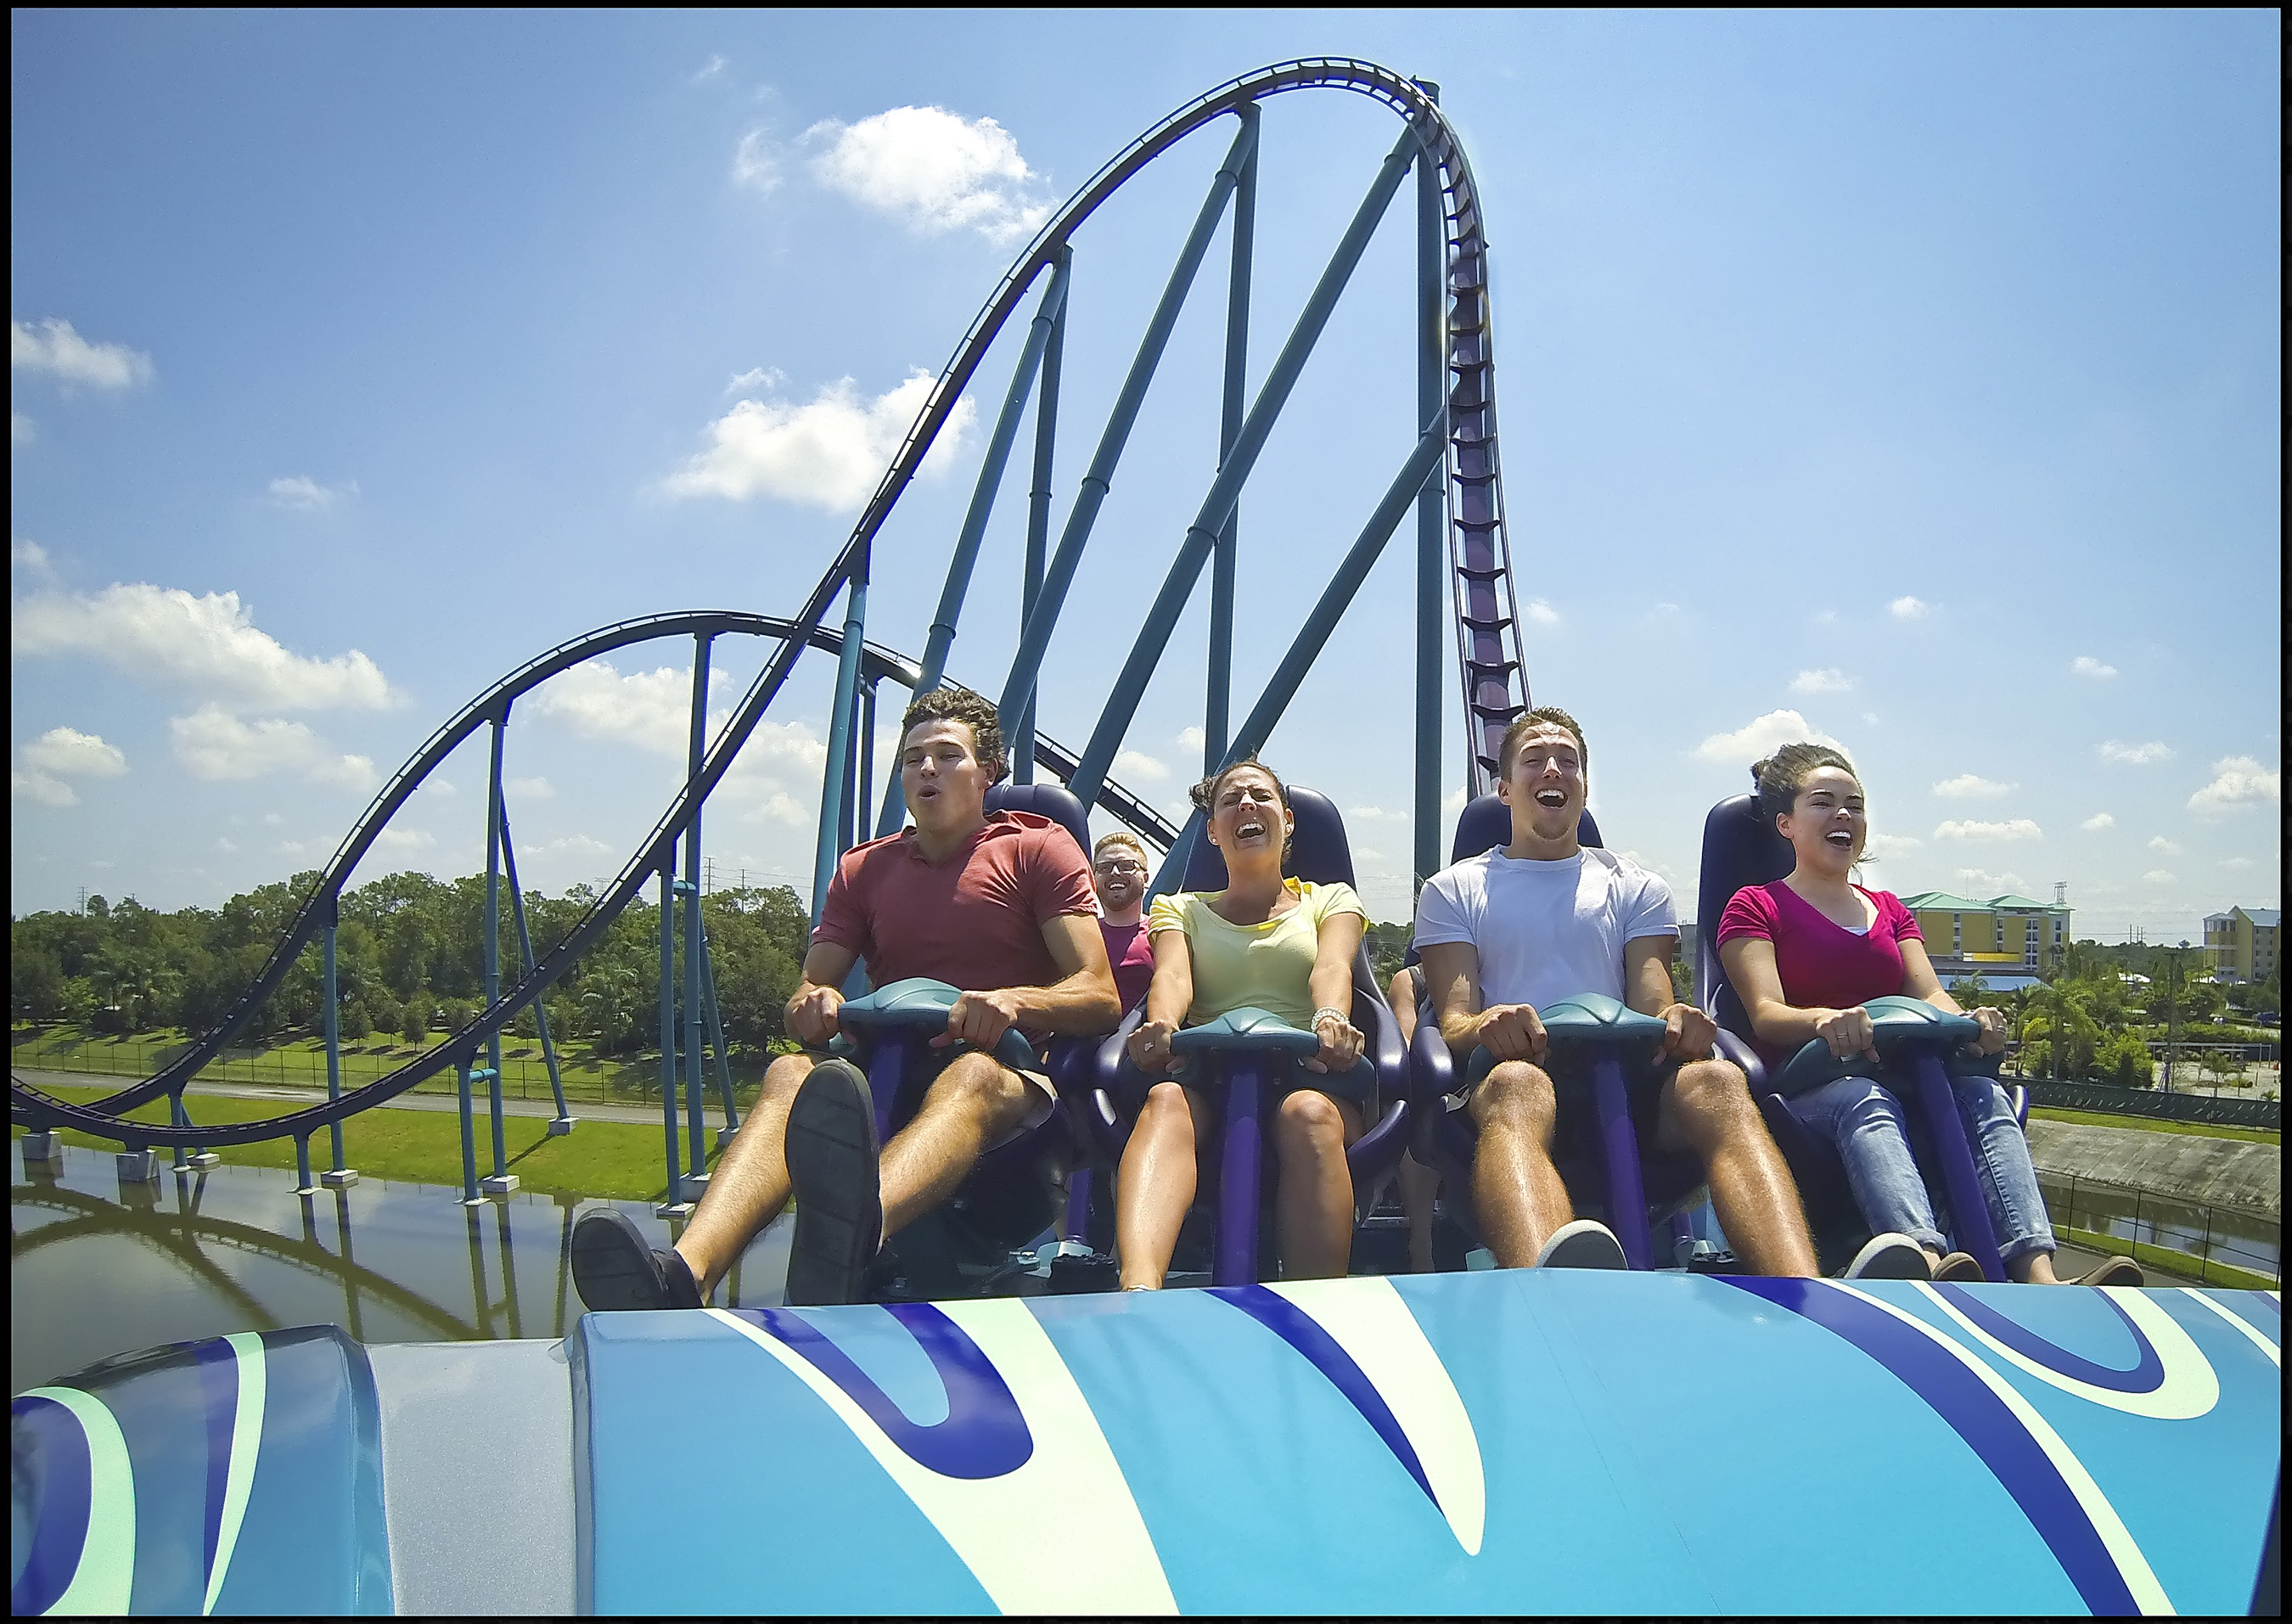 nisd-offers-discounts-on-six-flags-seaworld-and-schlitterbahn-tickets